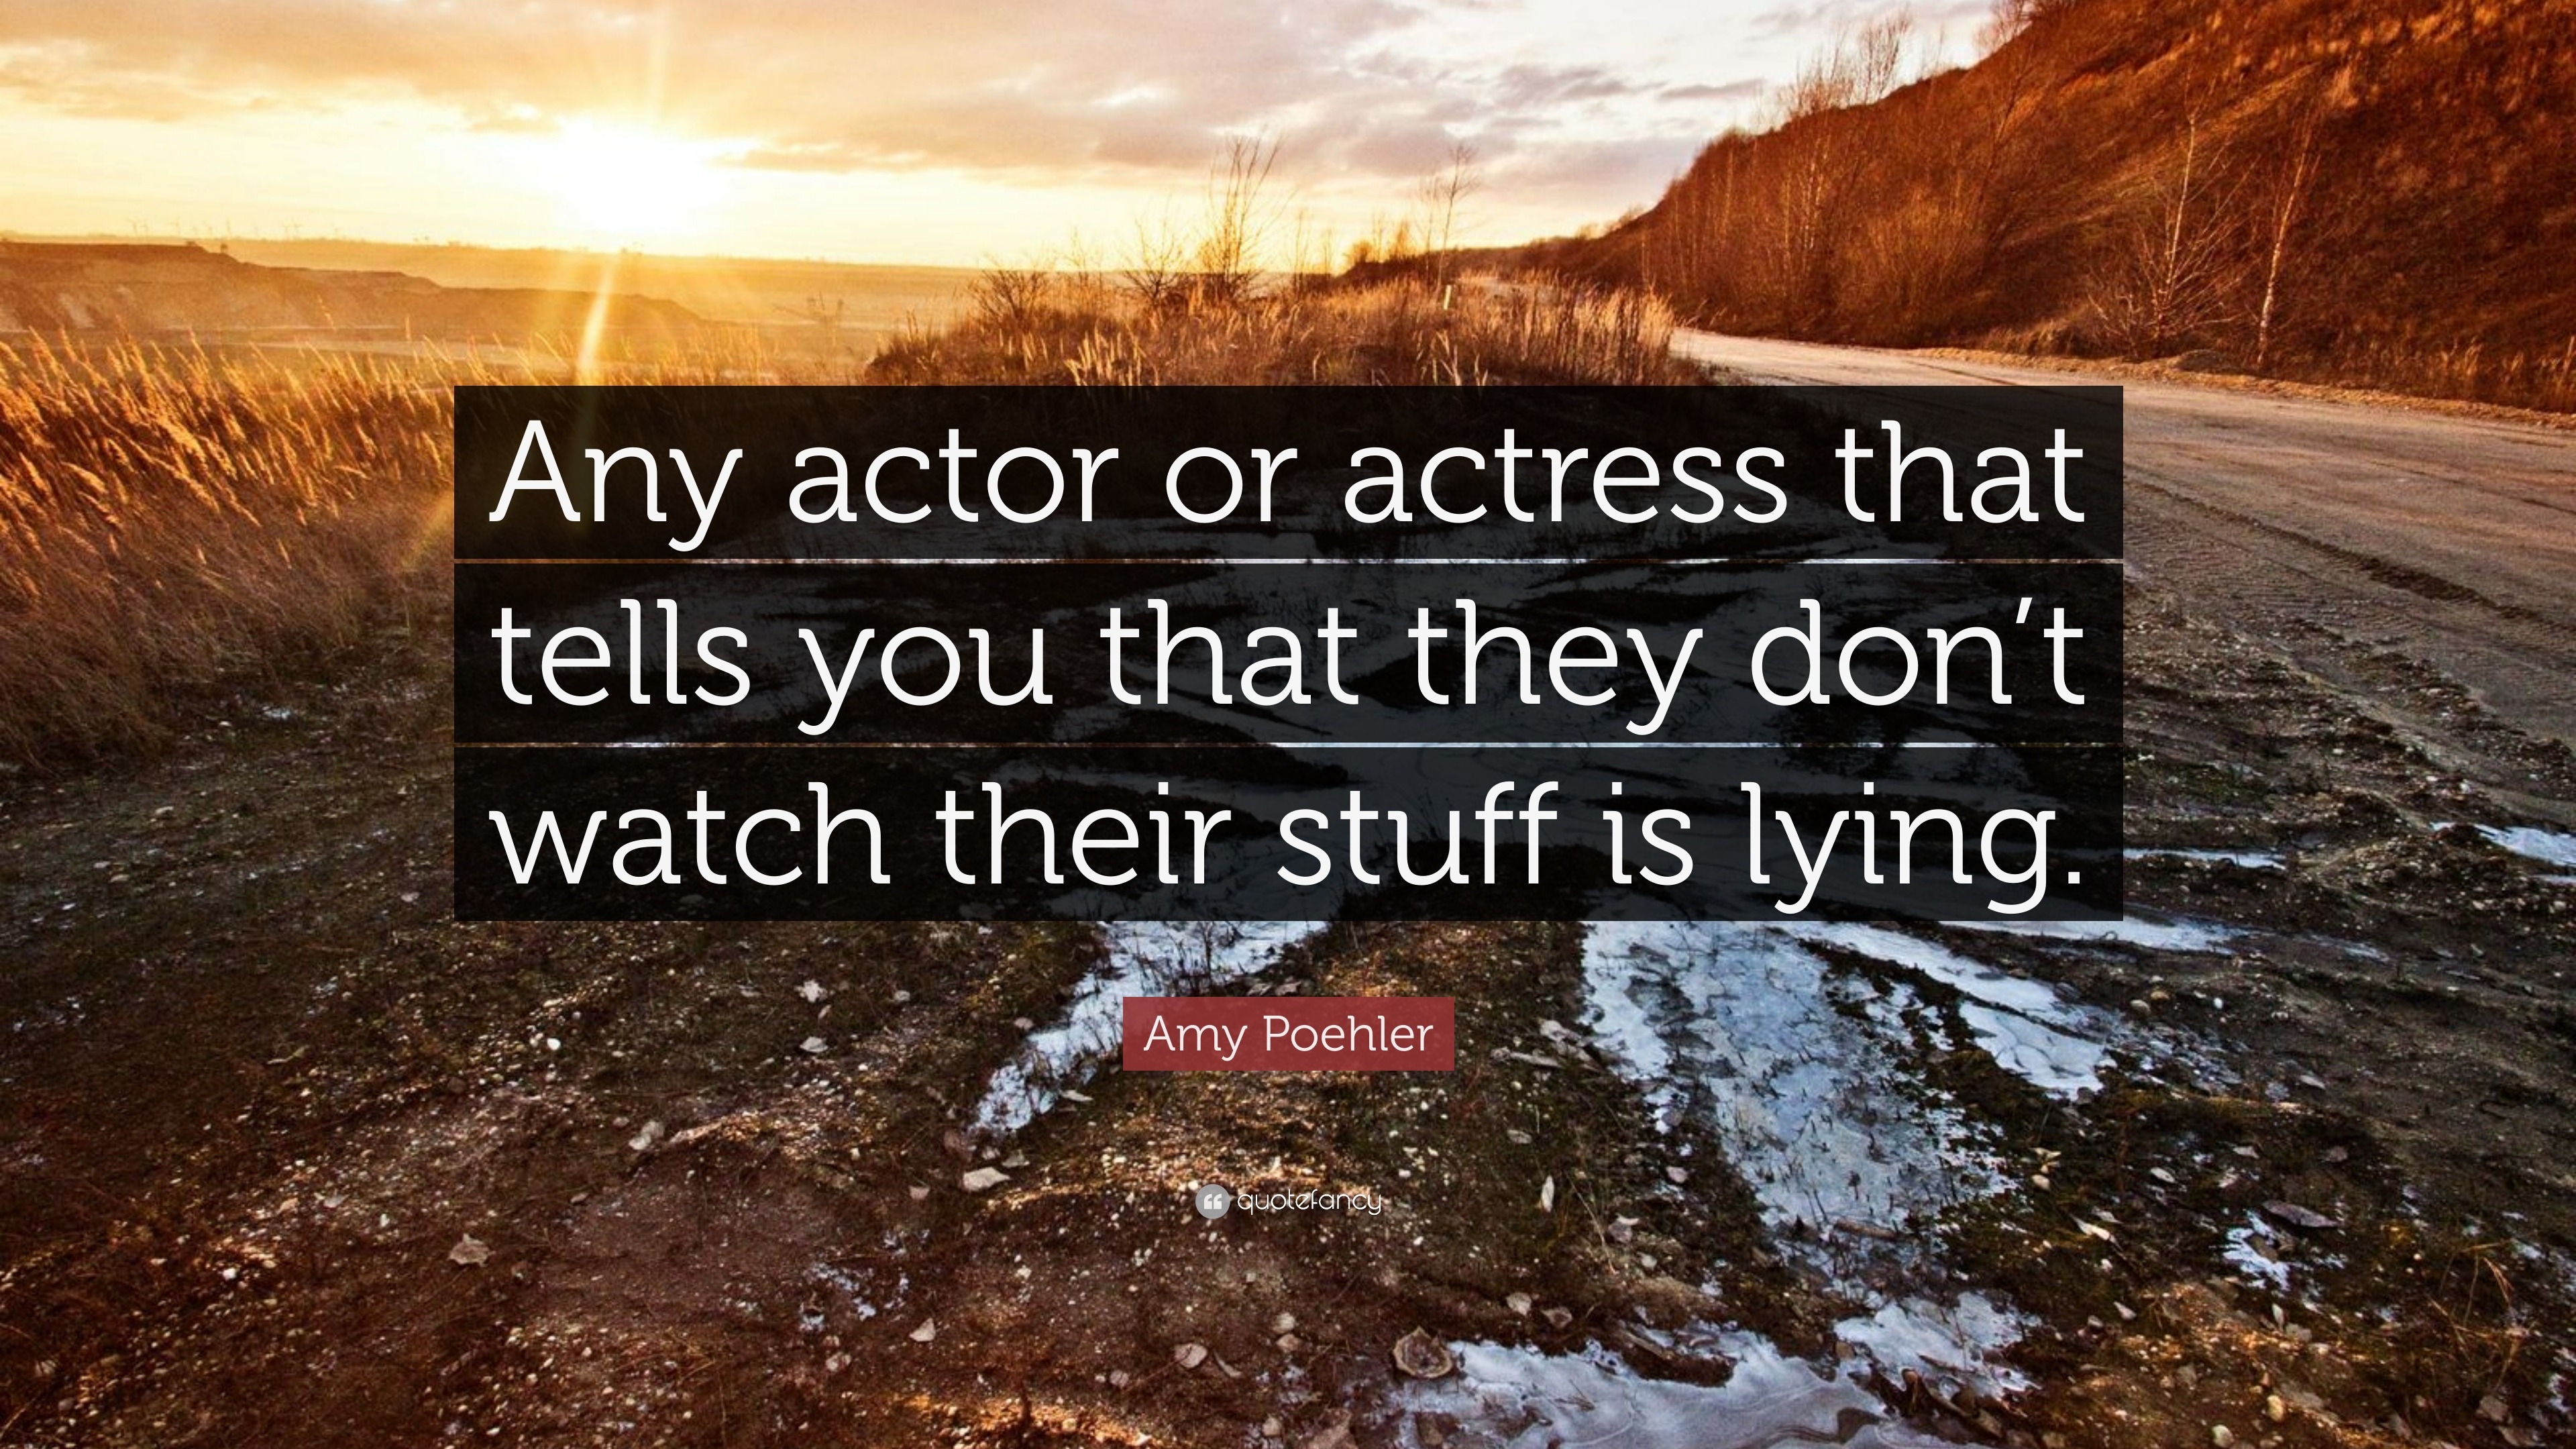 Amy Poehler Quote “any Actor Or Actress That Tells You That They Dont Watch Their Stuff Is Lying” 2965